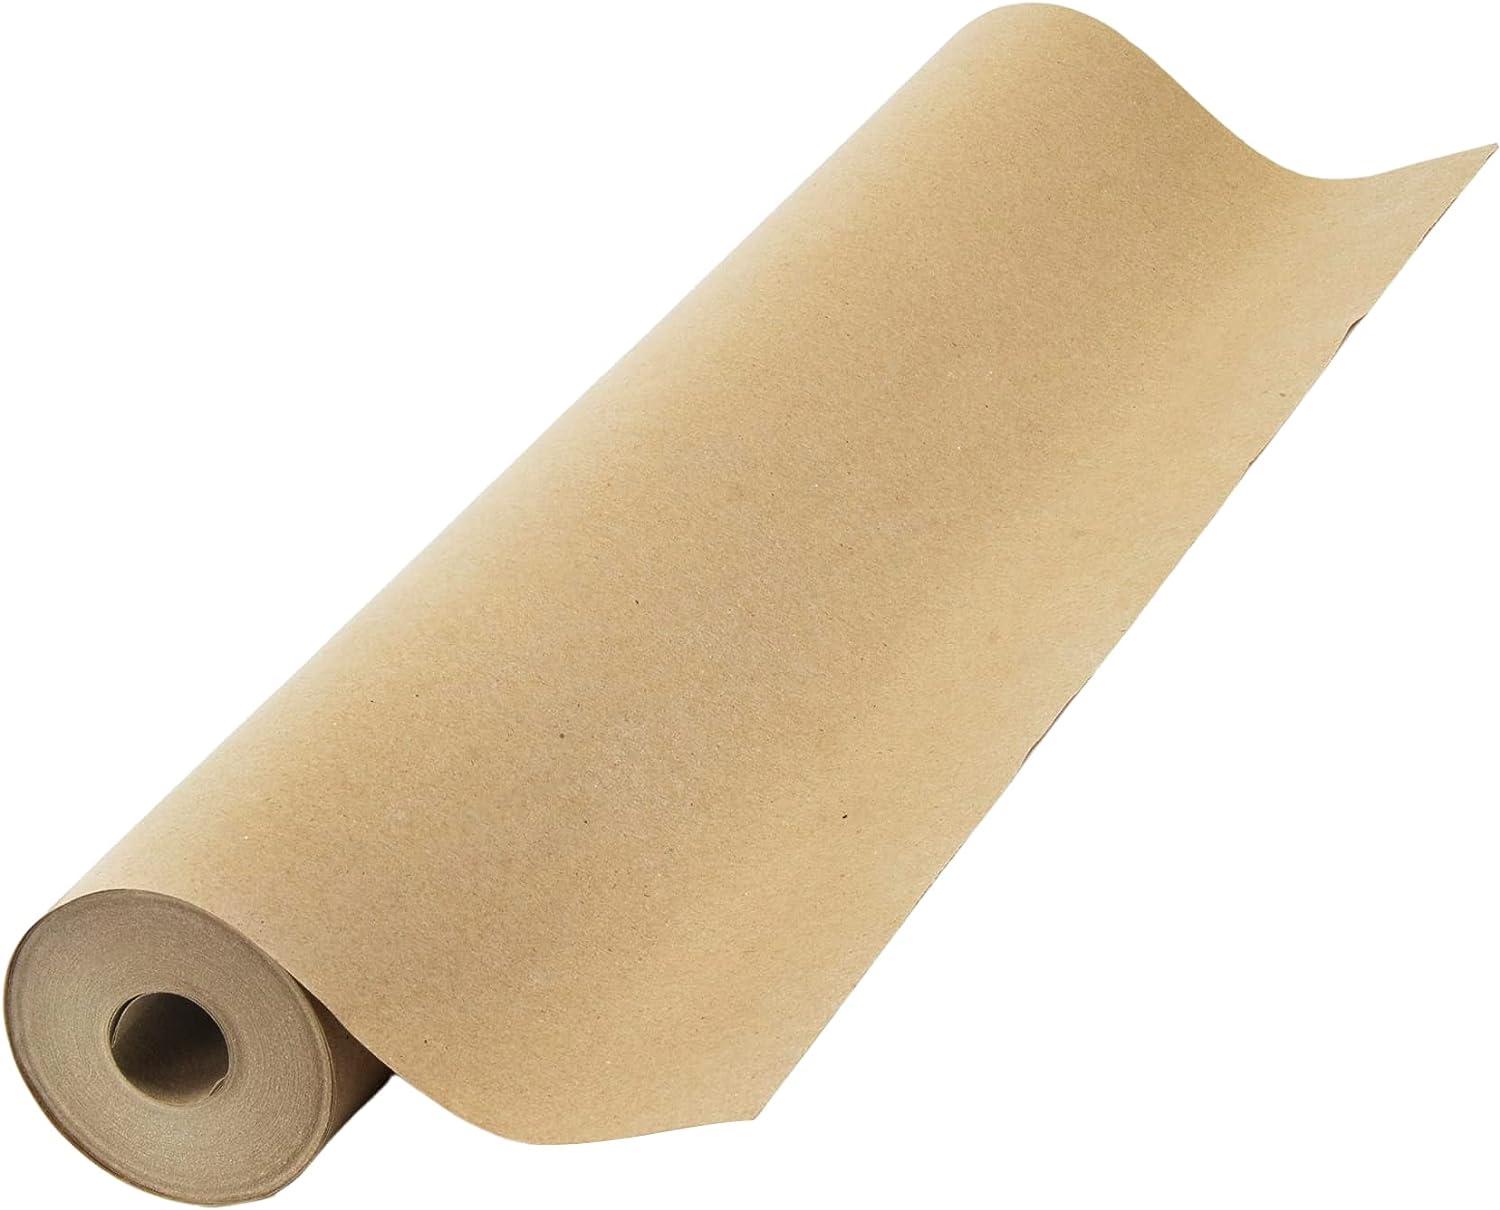 Kraft Brown Wrapping Paper Roll 18 x 2,400 (200 ft) – 100% Recyclable Craft Construction and Packing Paper for Use in Moving, Bulletin Board